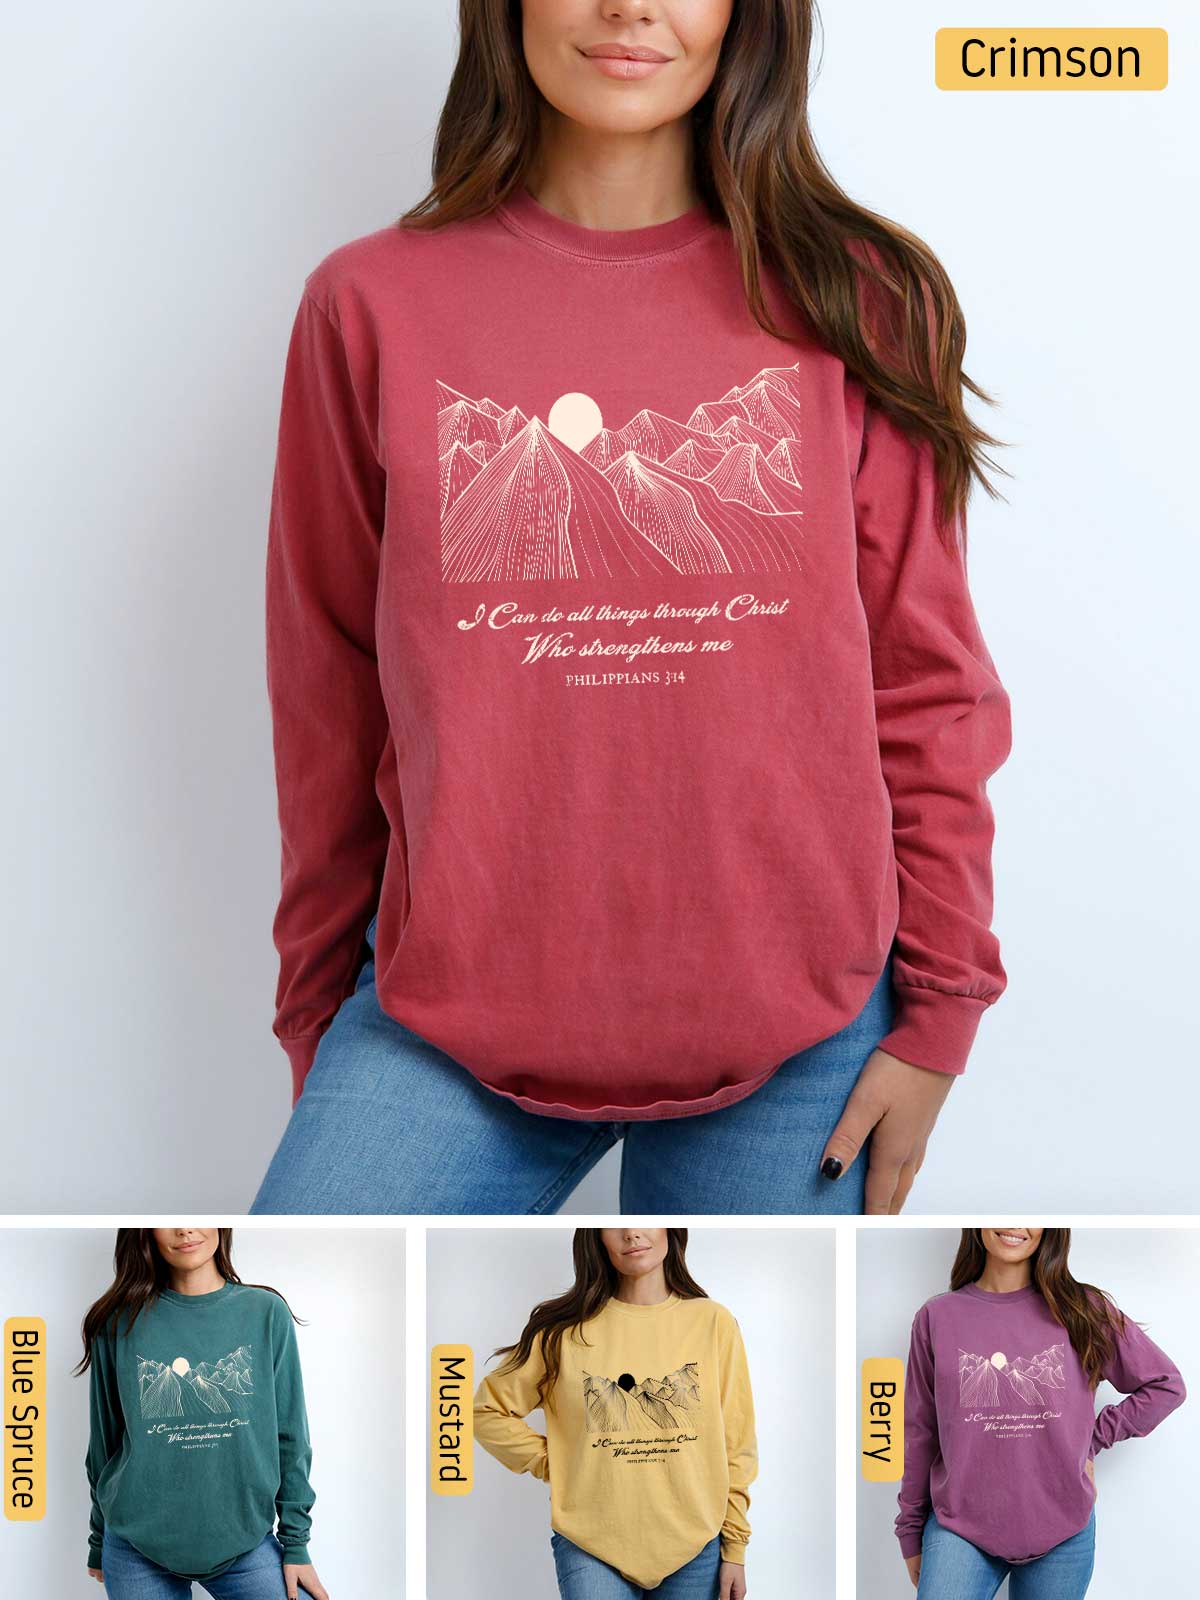 a woman wearing a red sweatshirt with a mountain scene on it